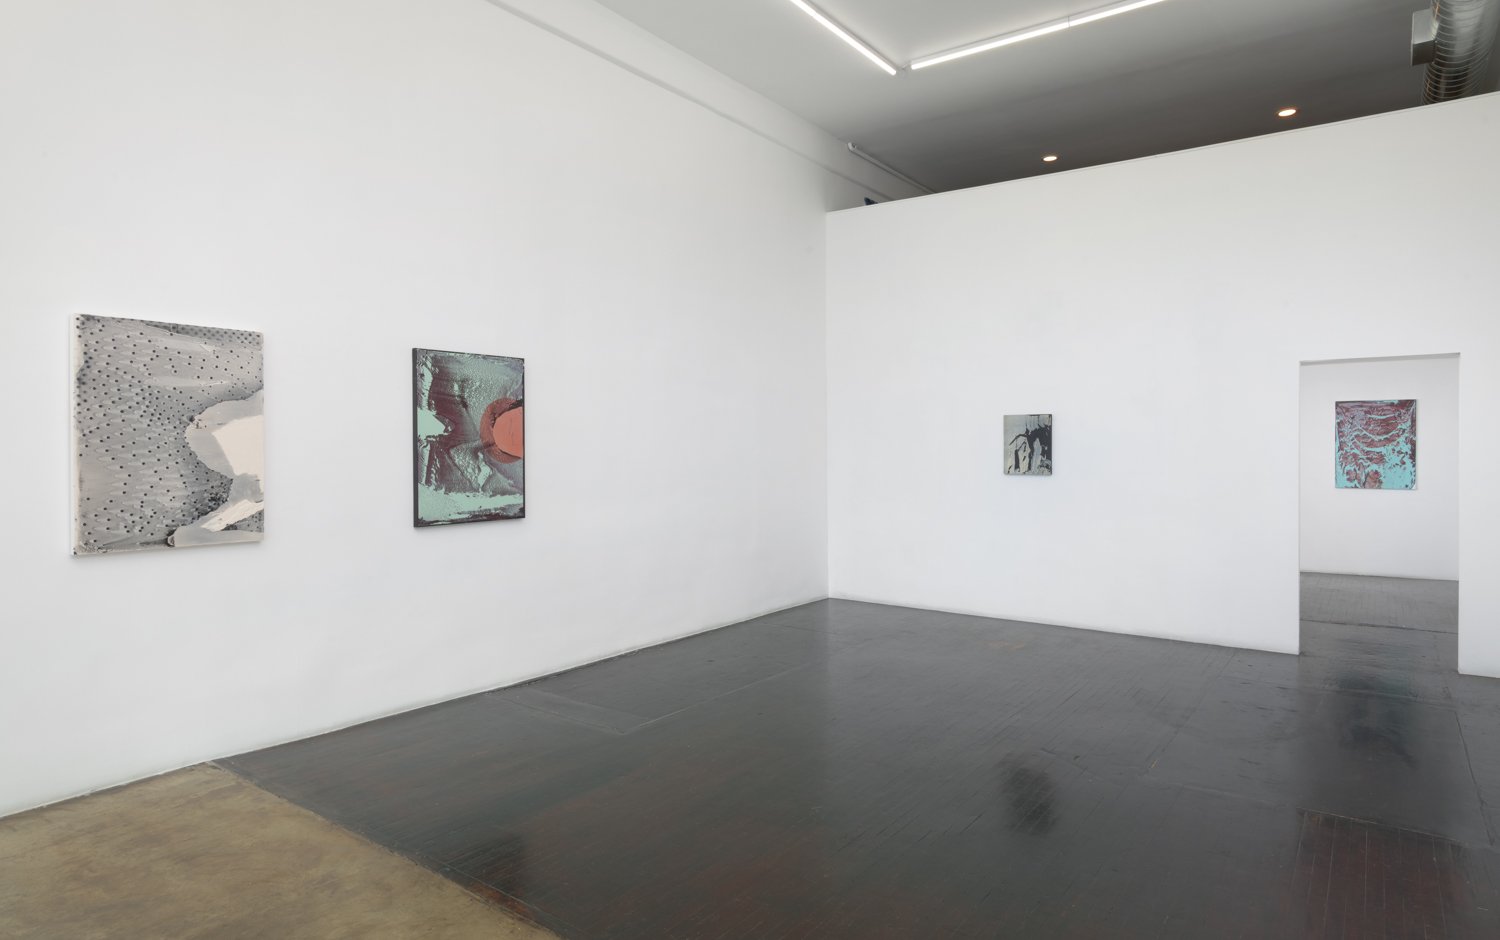  Installation views, Floating Windows, AF Projects, Los Angeles, 2022, photo: Robert Wedemeyer   